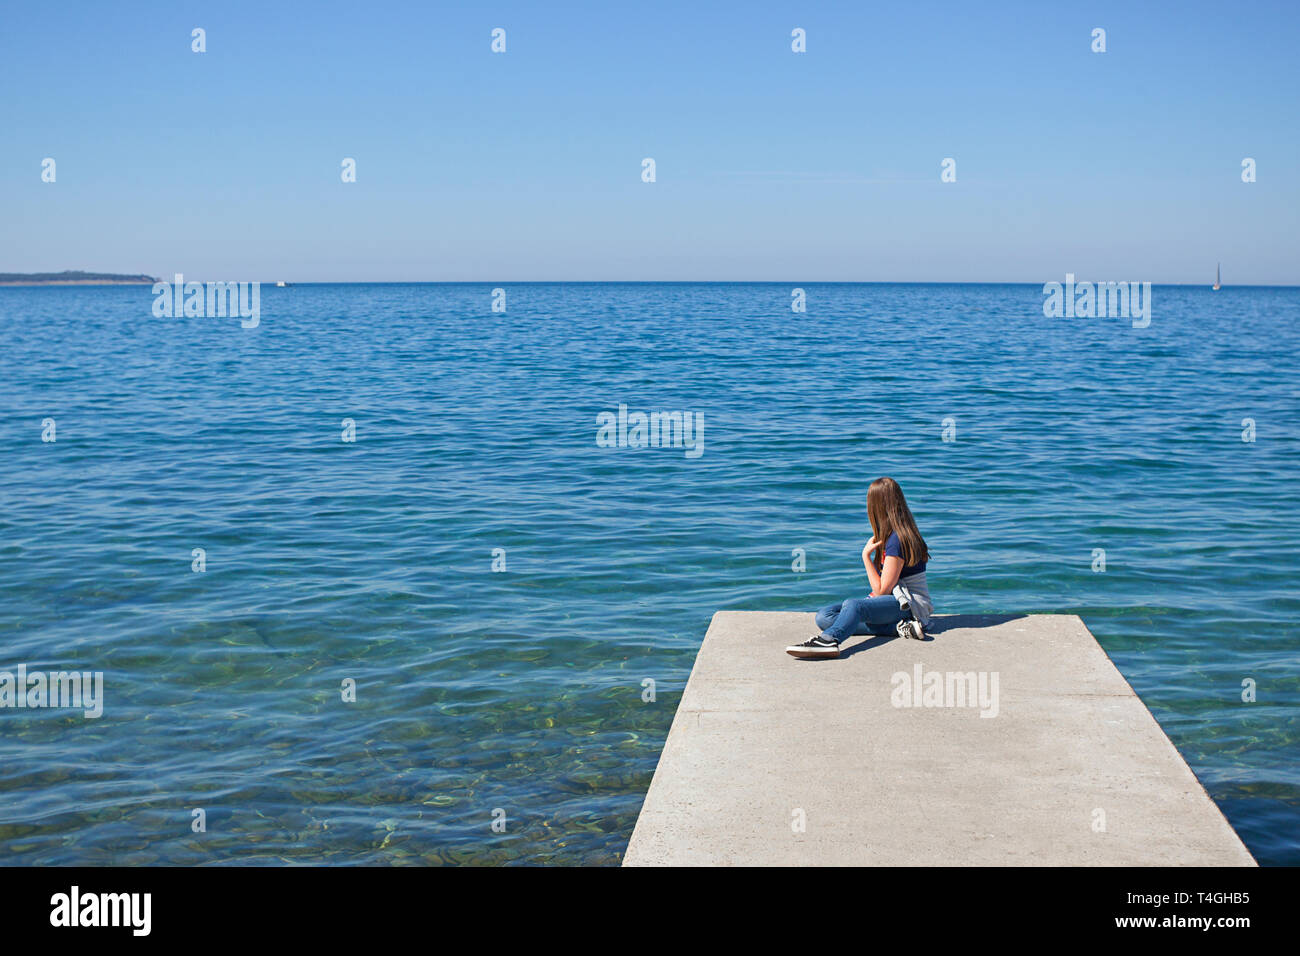 Teenage girl alone on jetty by a turquoise sea Stock Photo